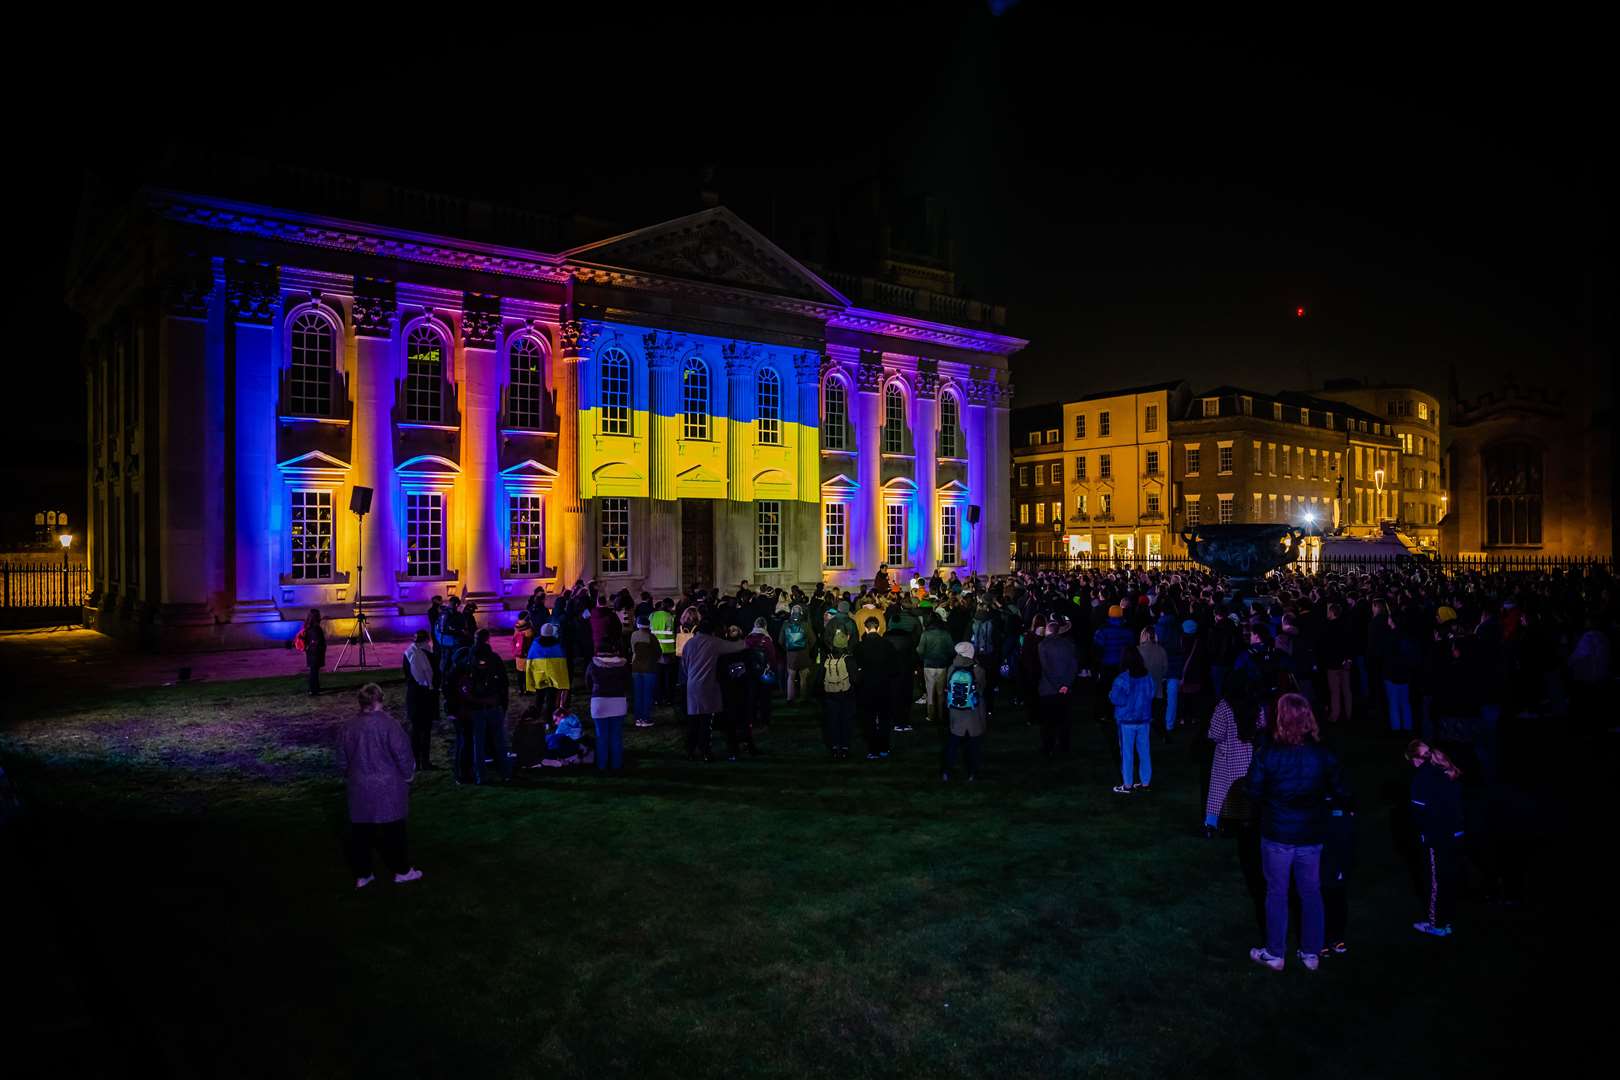 Senate House at Cambridge lit up in blue and yellow lights